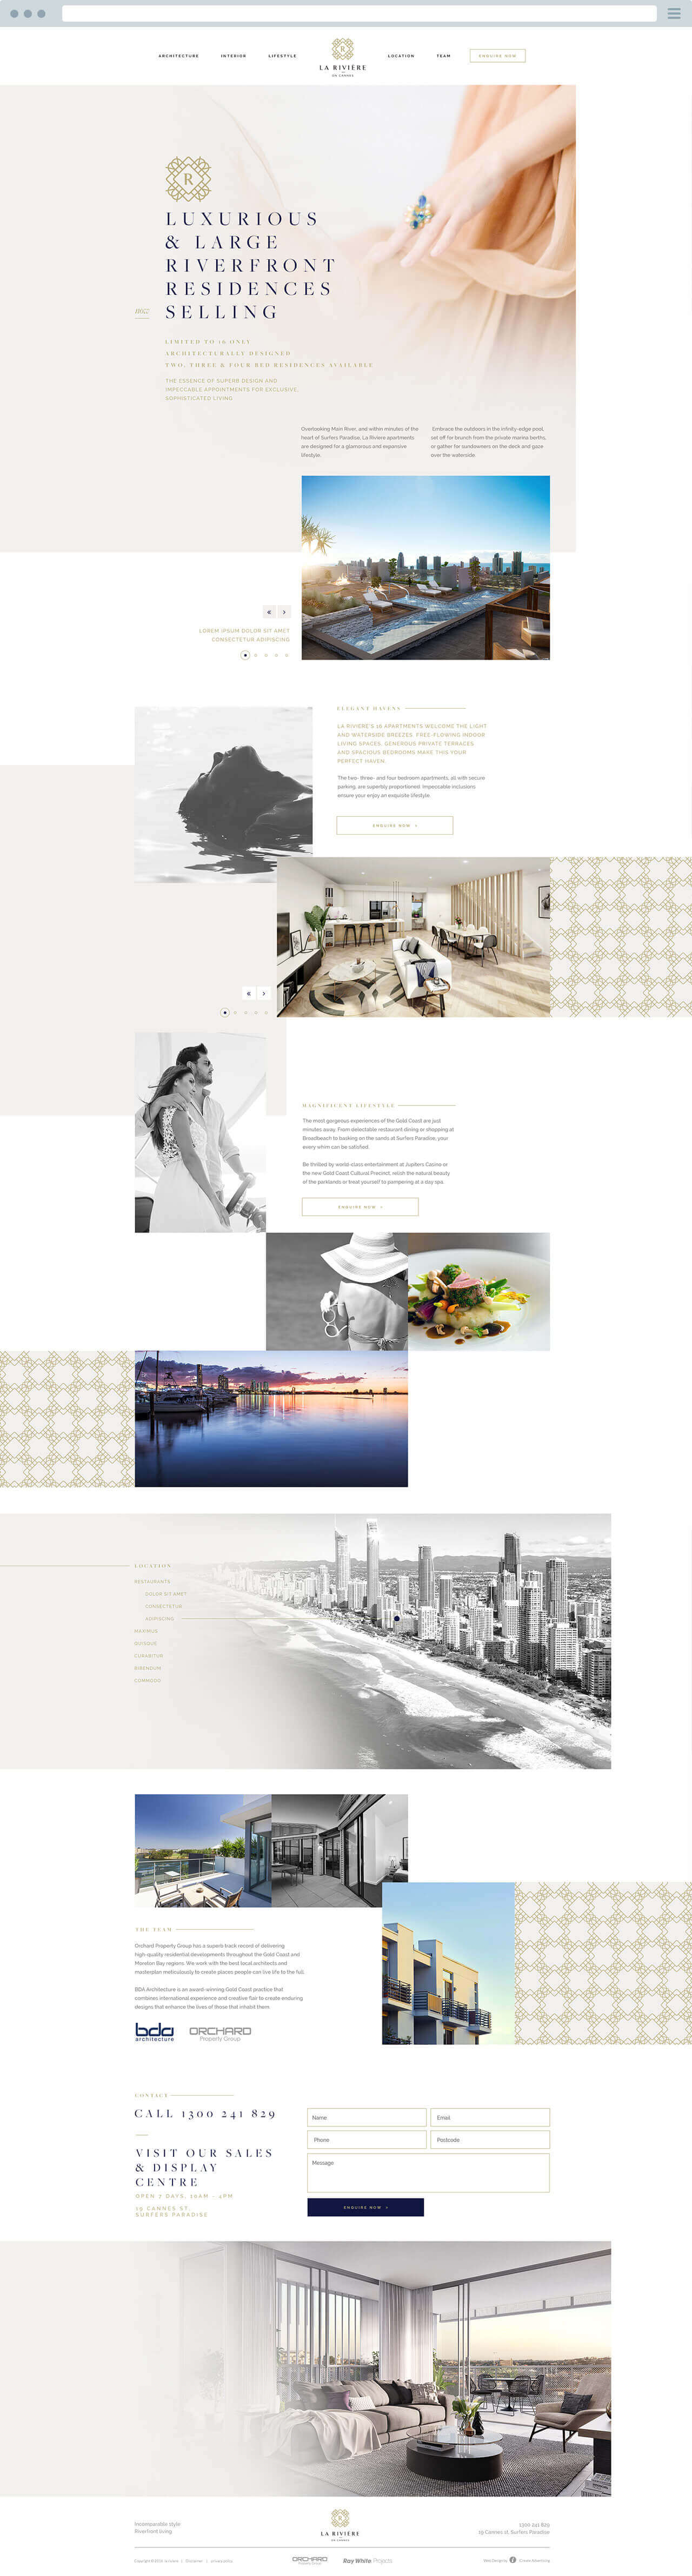 La Riviere on Cannes one page website design